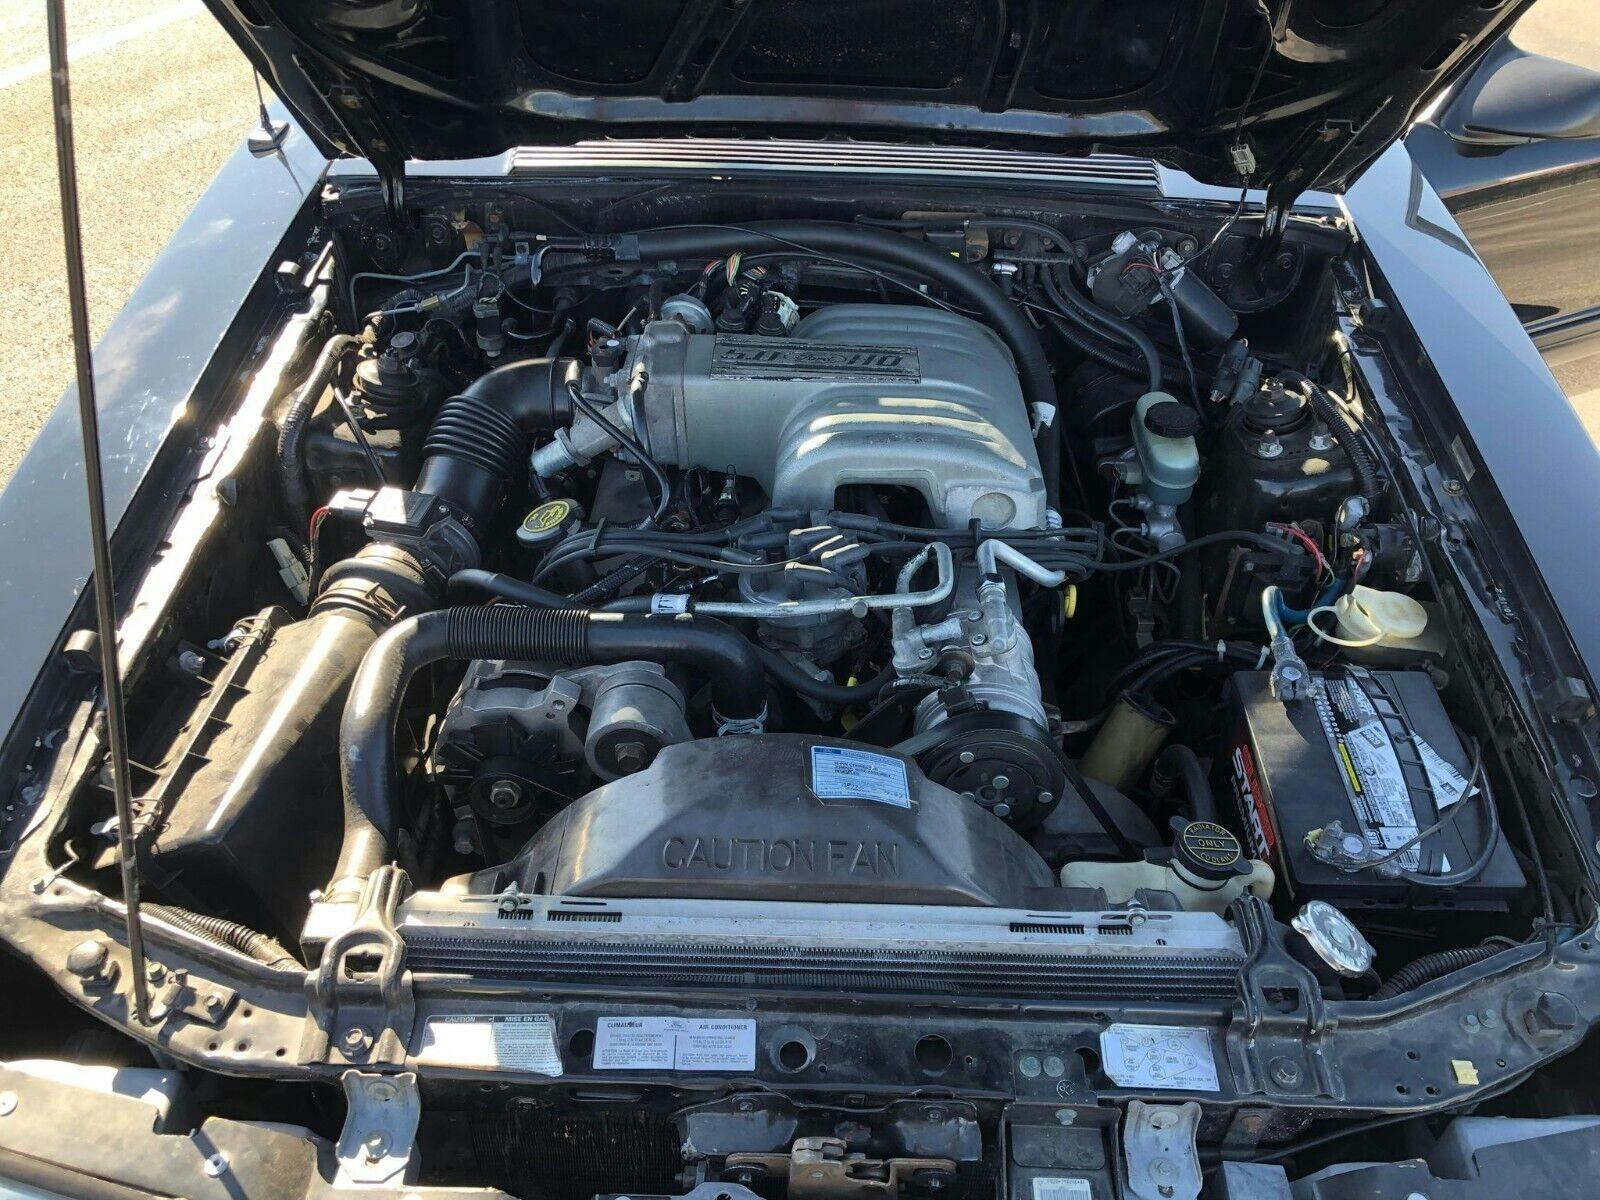 1990 Ford Mustang Holly research development vehicle engine bay